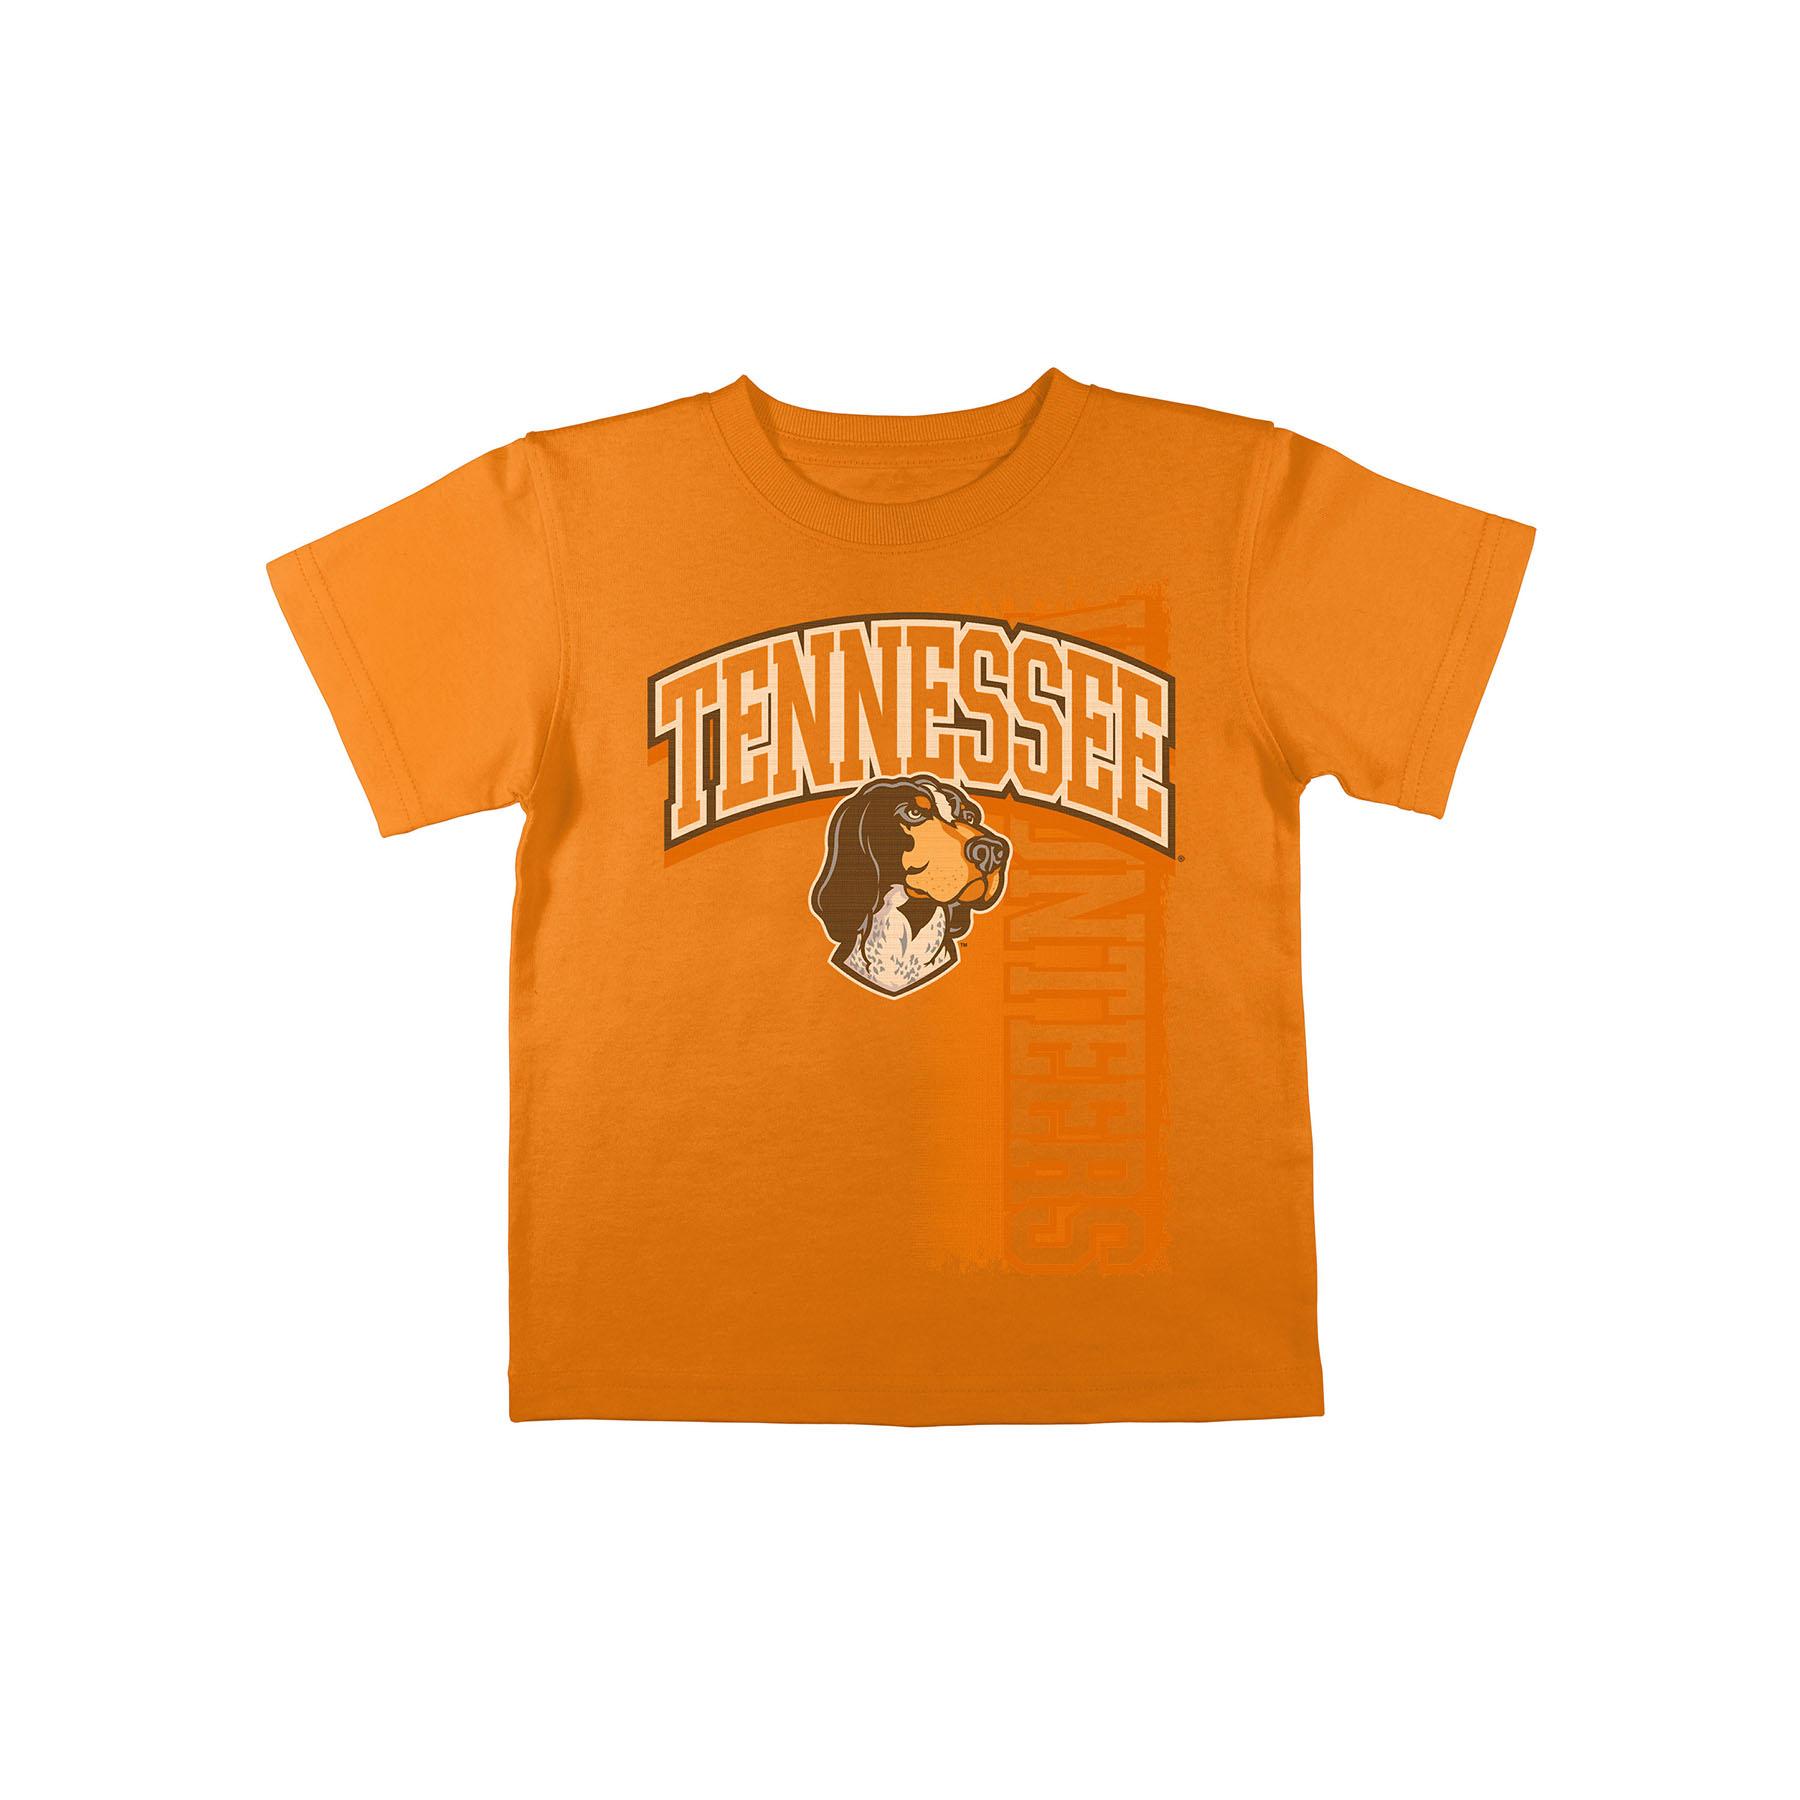 NCAA Boys' Graphic T-Shirt - Tennessee Volunteers